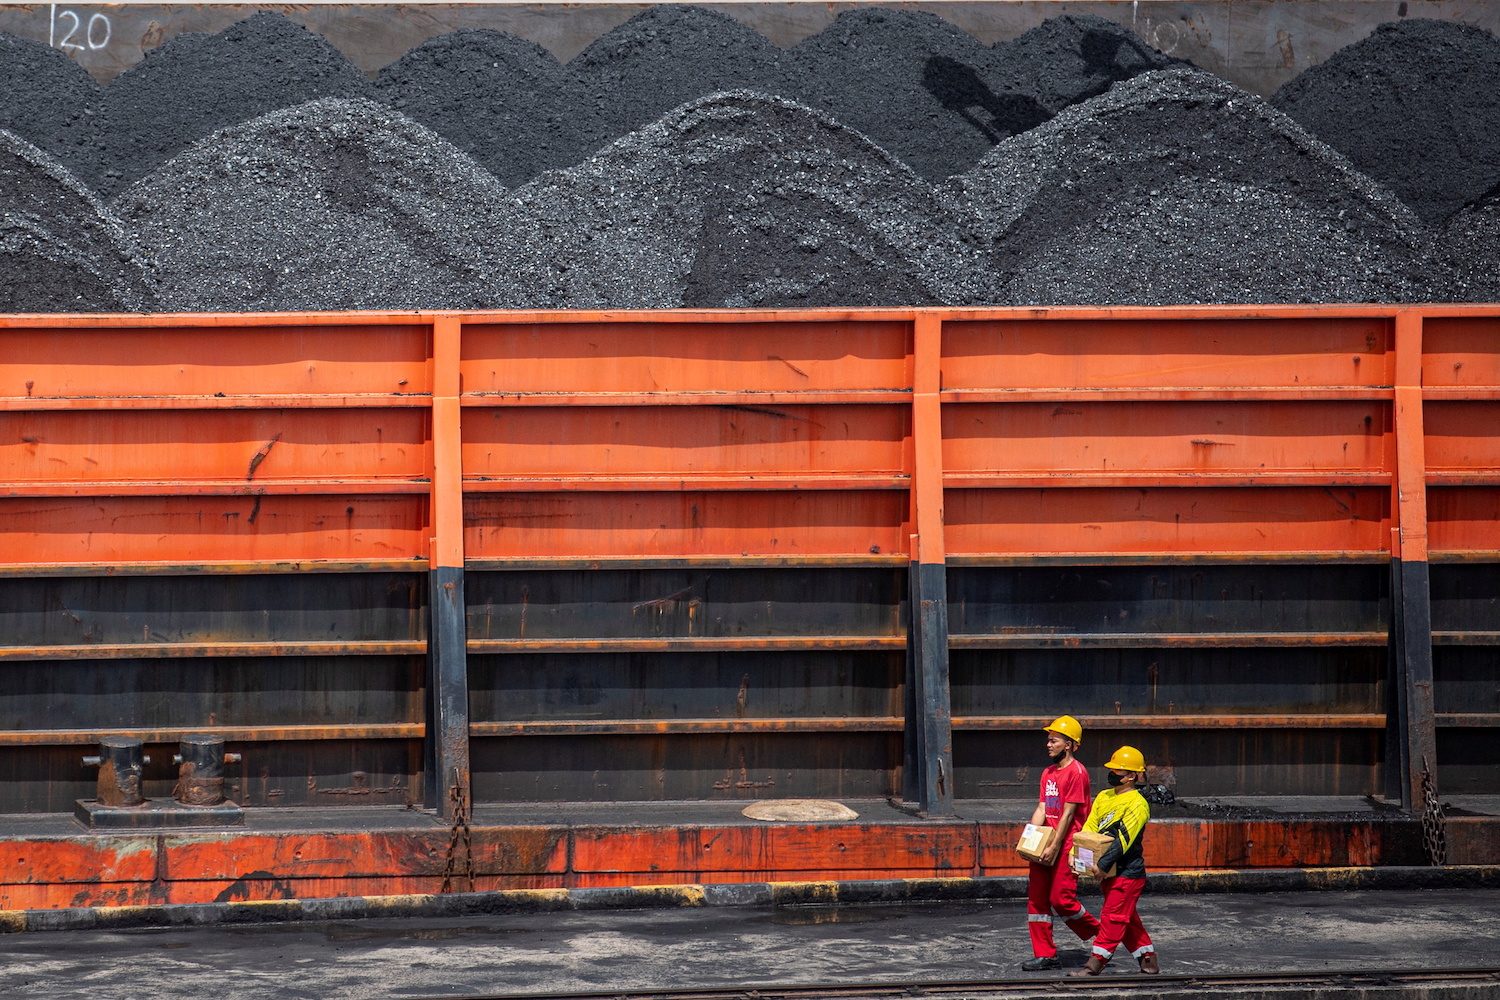 Indonesia secures more coal supplies ahead of export ban review